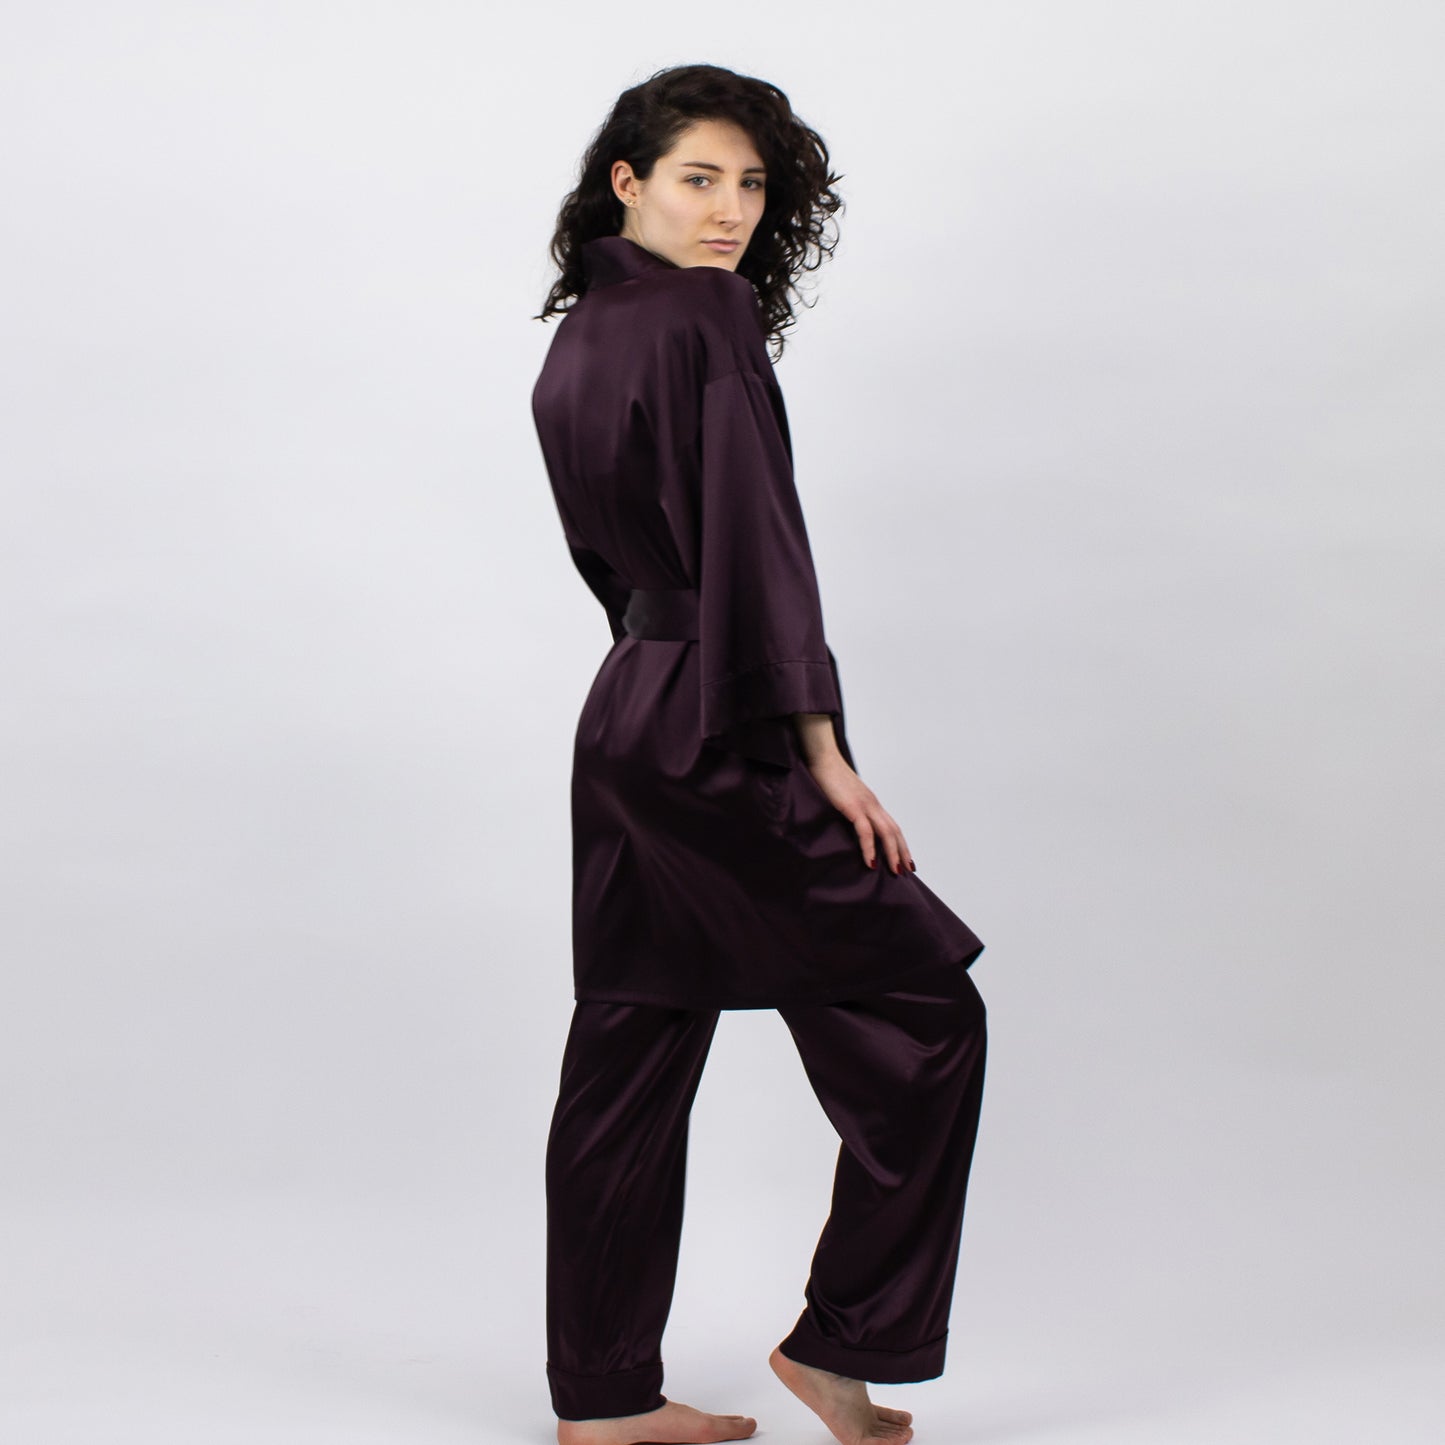 The Lady fudge robe features a relaxed straight cut, wrap style front, a belted waist, a short length and a comfortable fit.